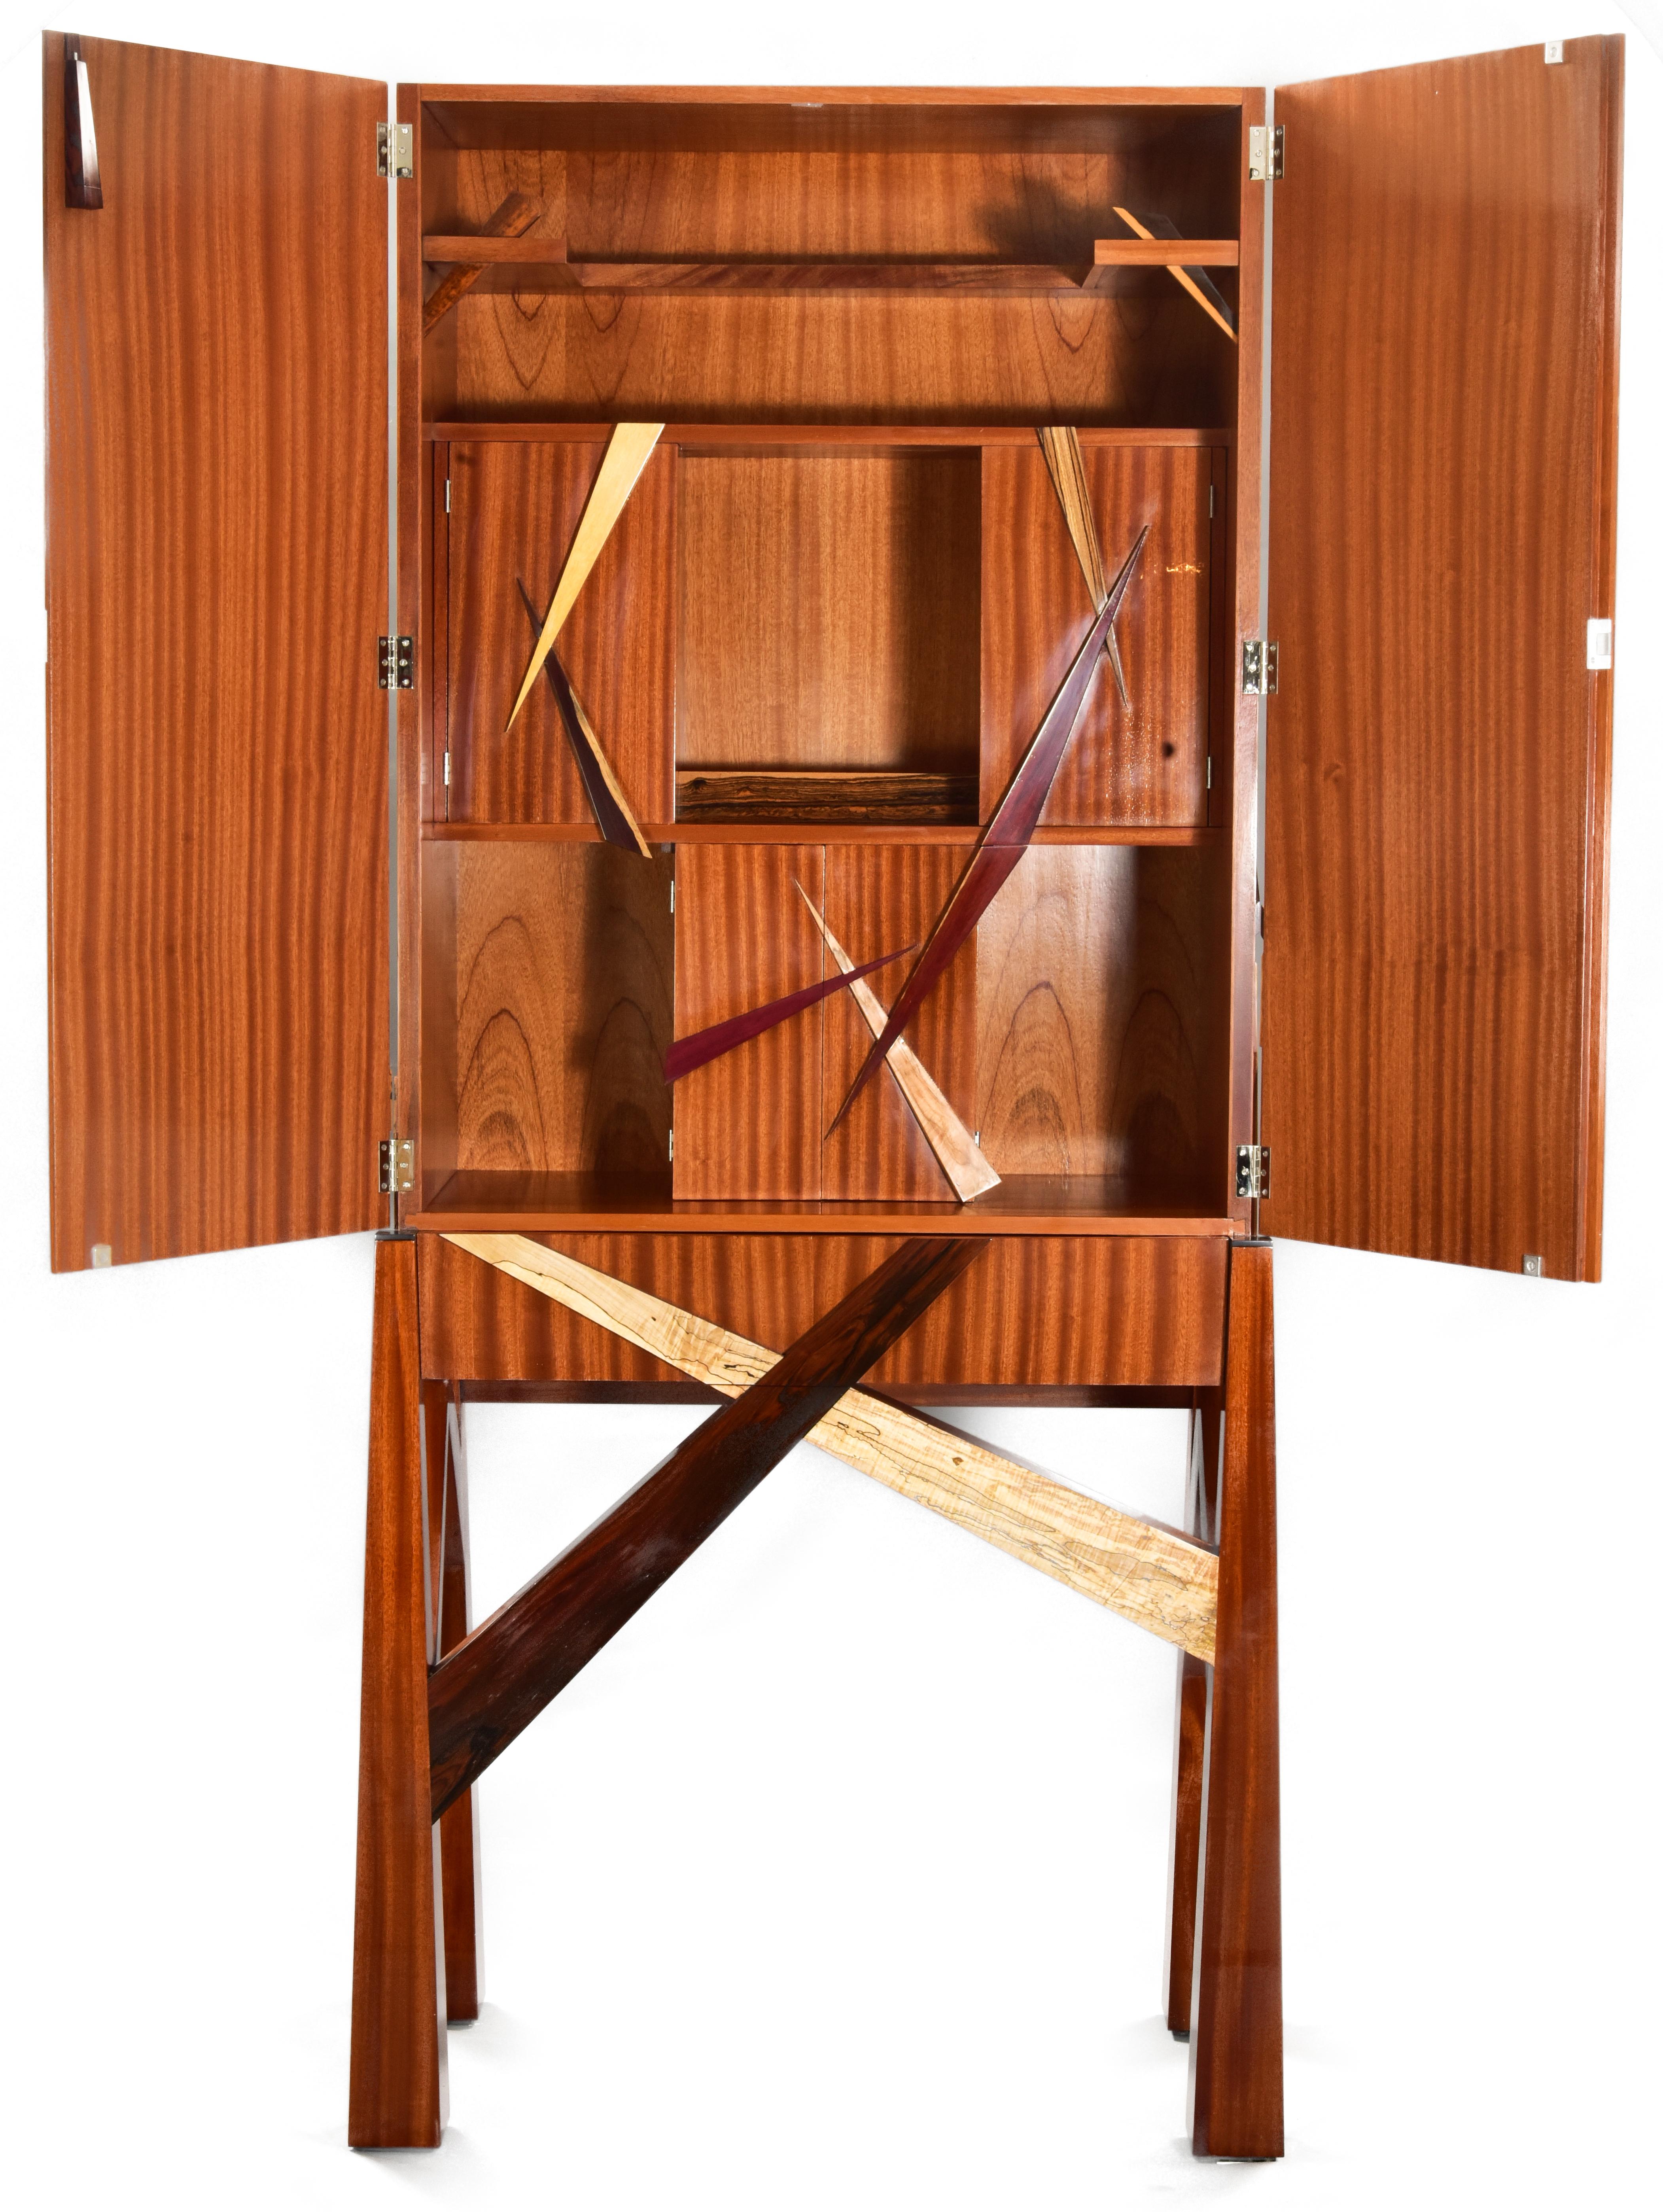 Hand-Crafted One of a Kind Artistic Sculptural Exotic Wood and Mahogany Liquor Cabinet For Sale